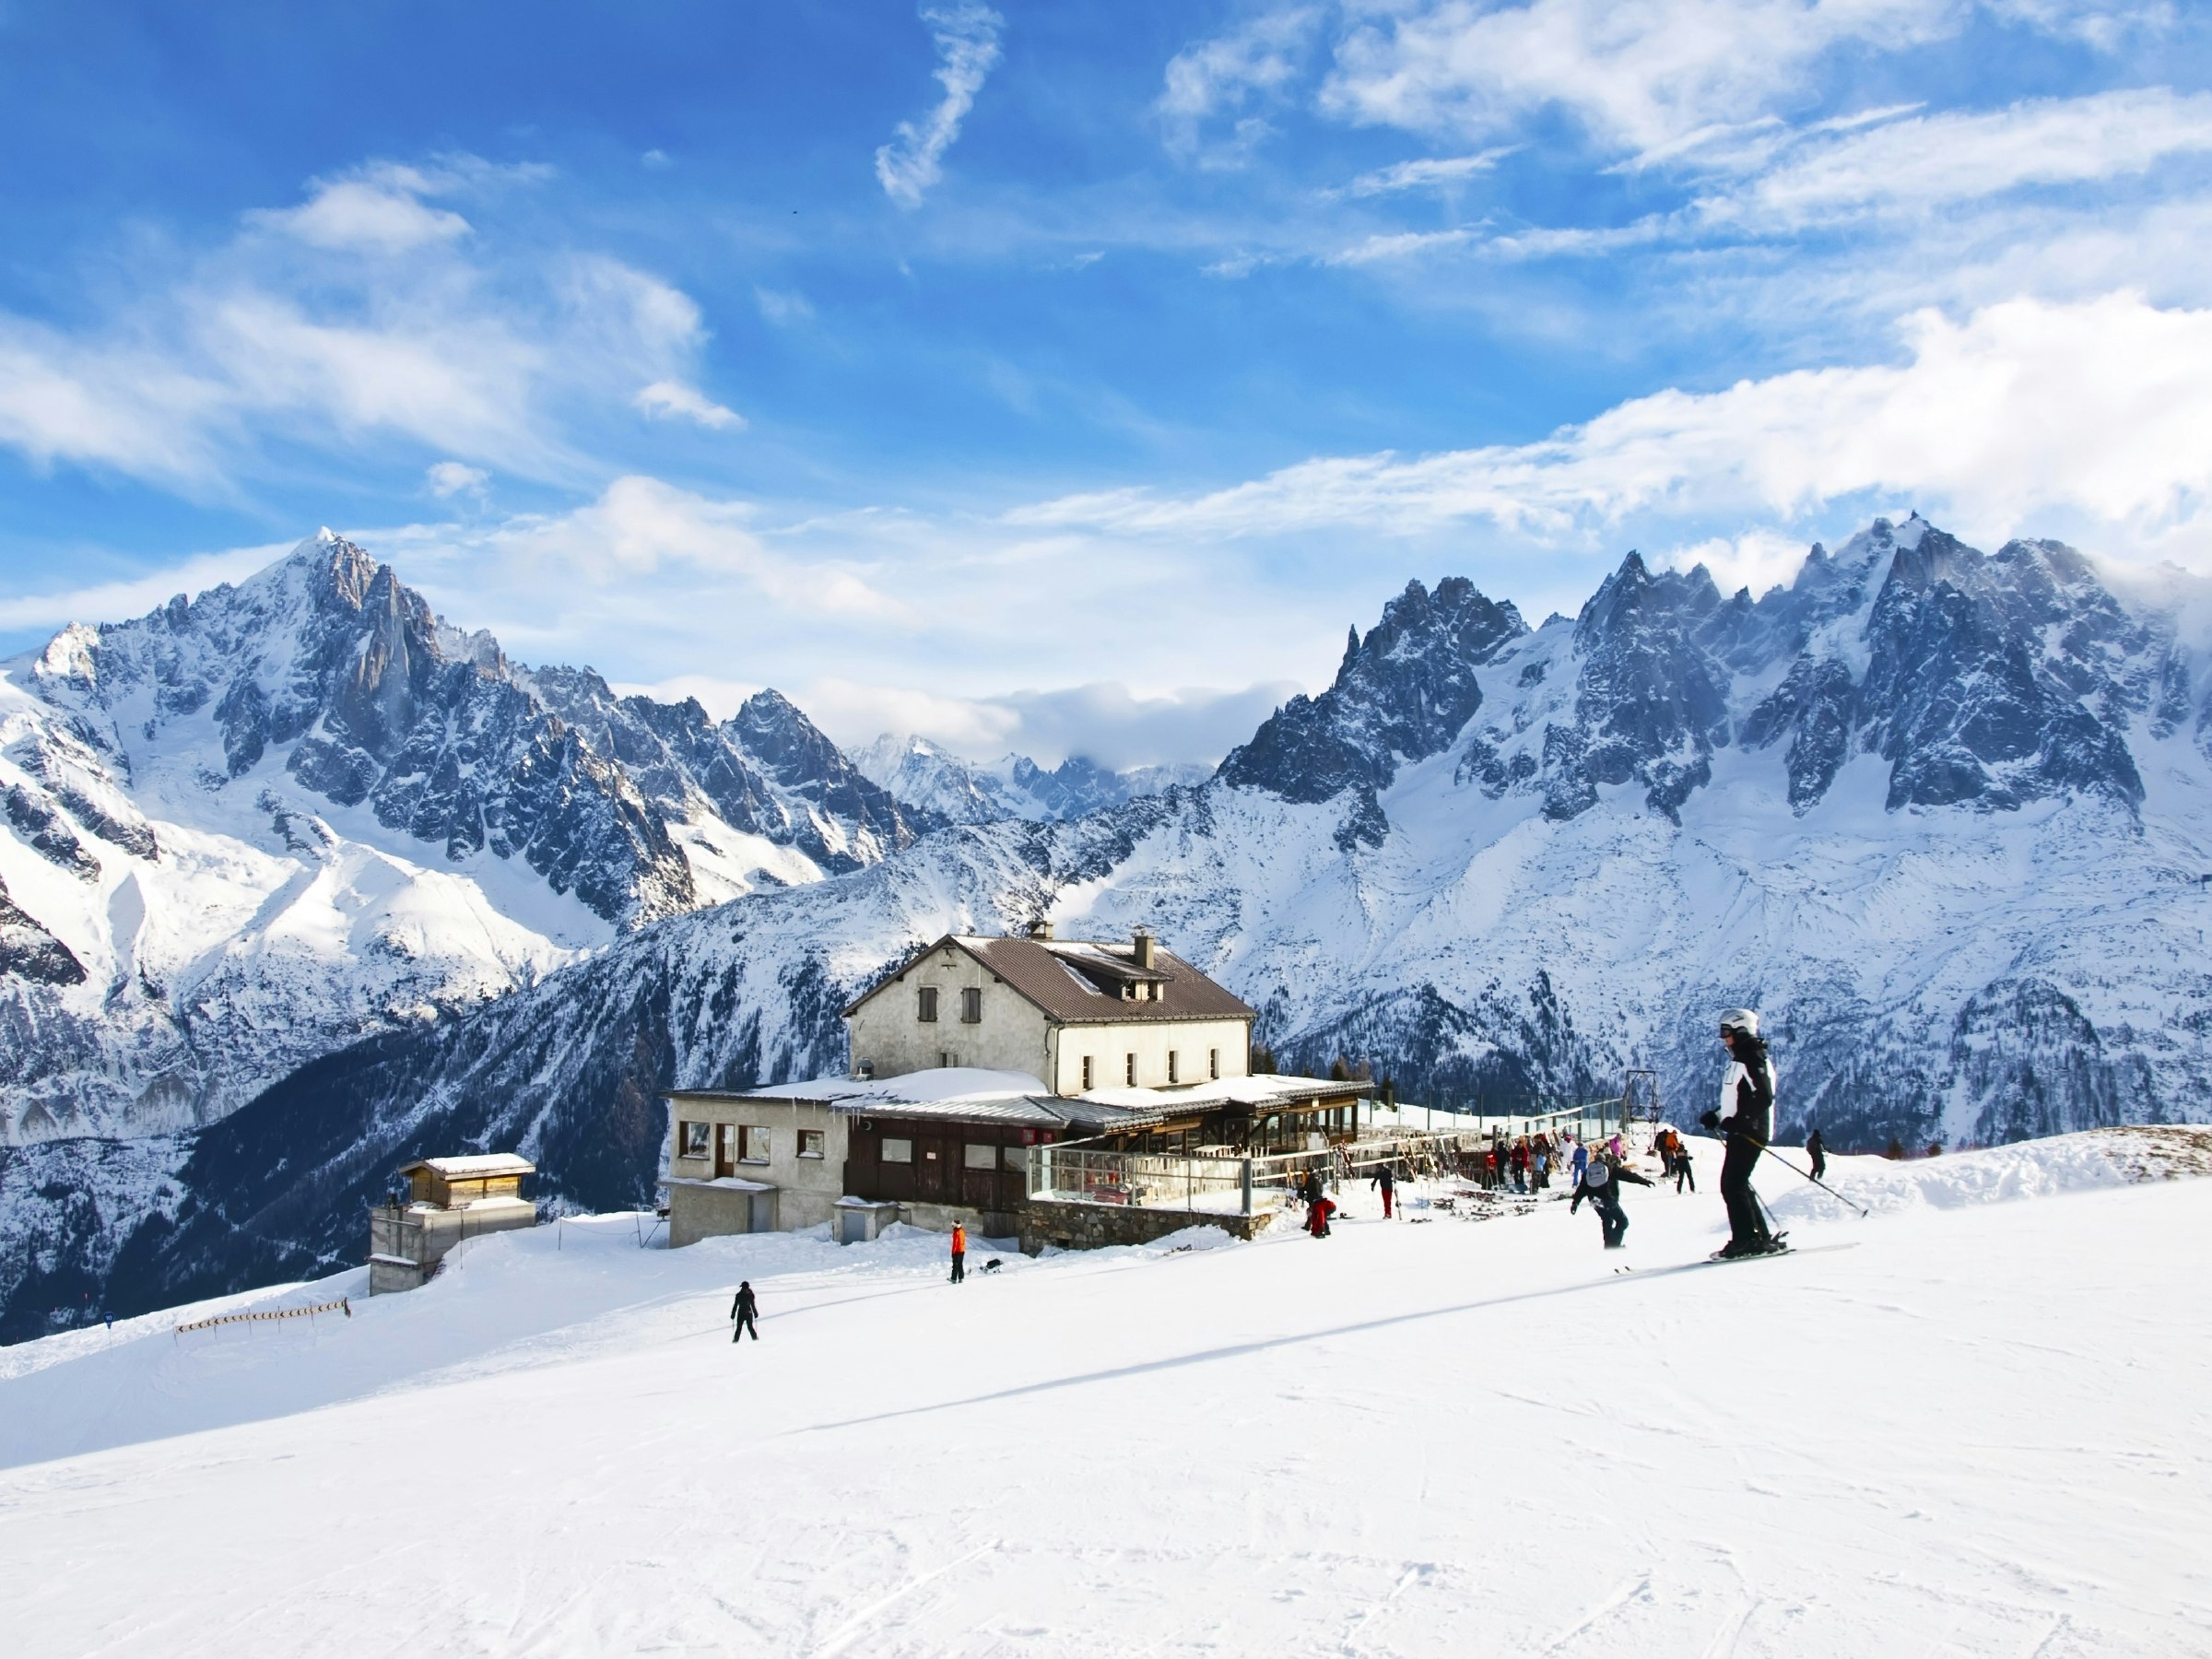 The winter view on the mountains and ski lift station in French Alps near Chamonix Mont-Blanc